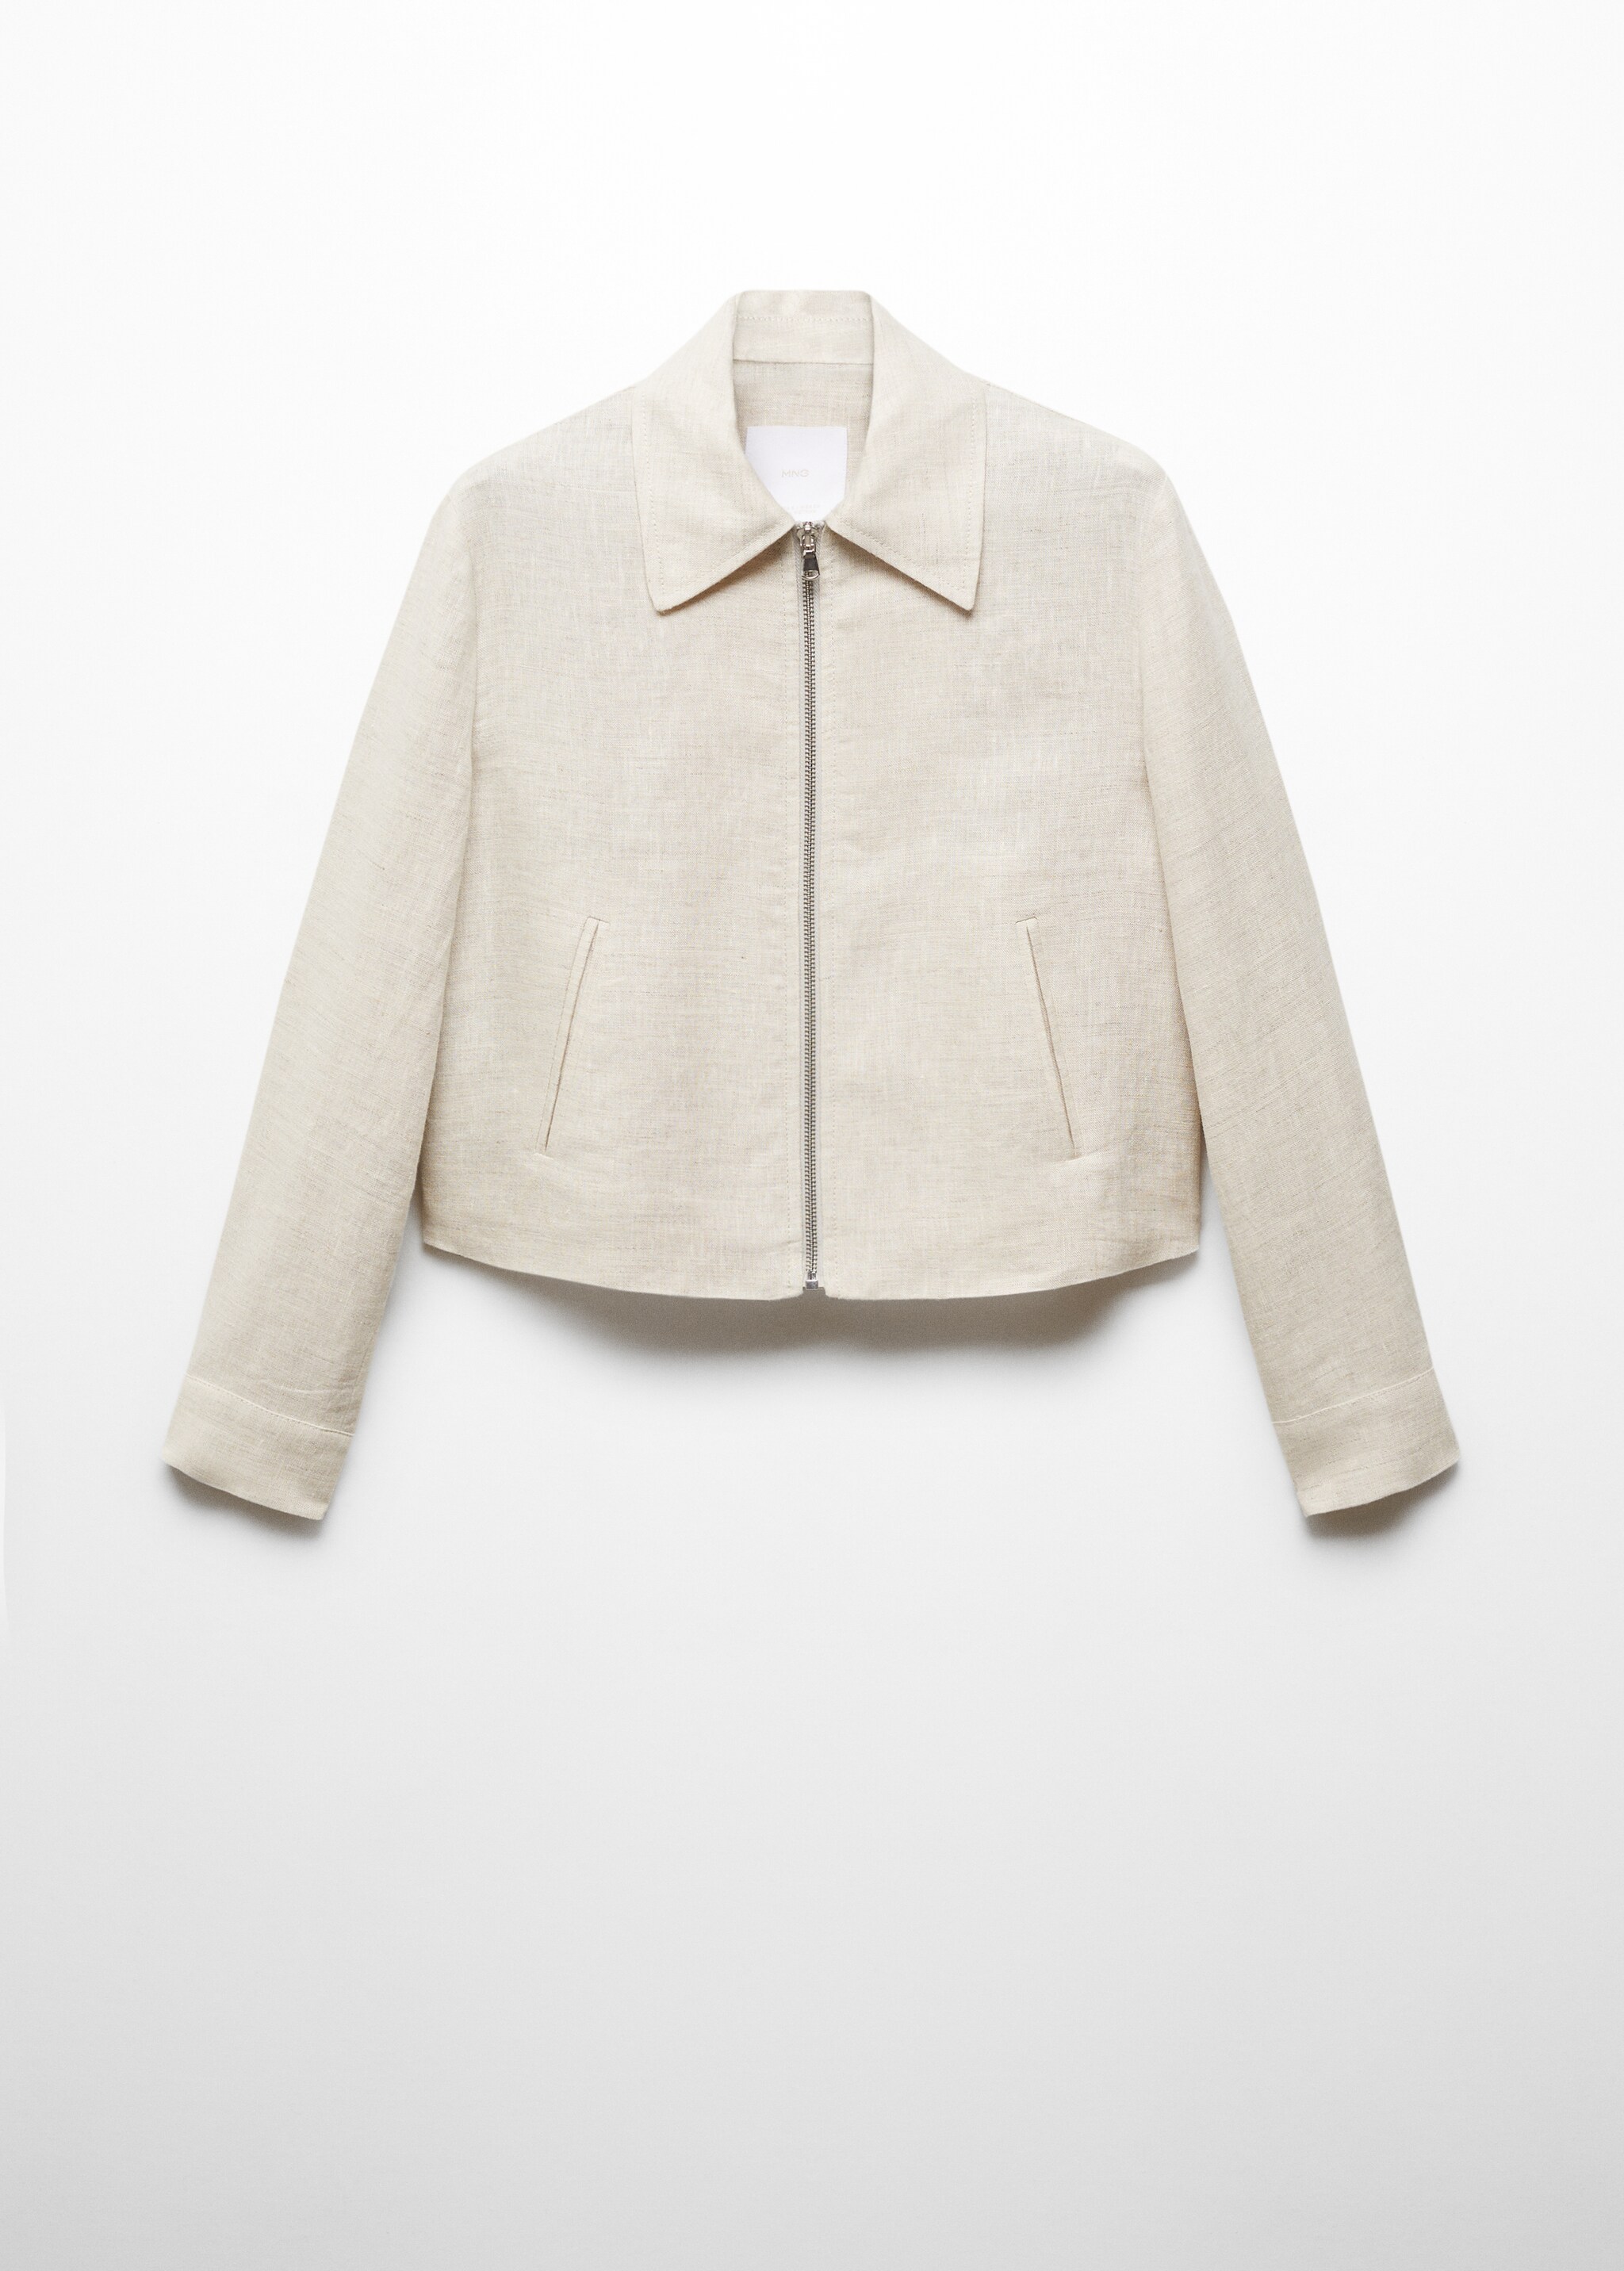 100% linen jacket with zip - Article without model